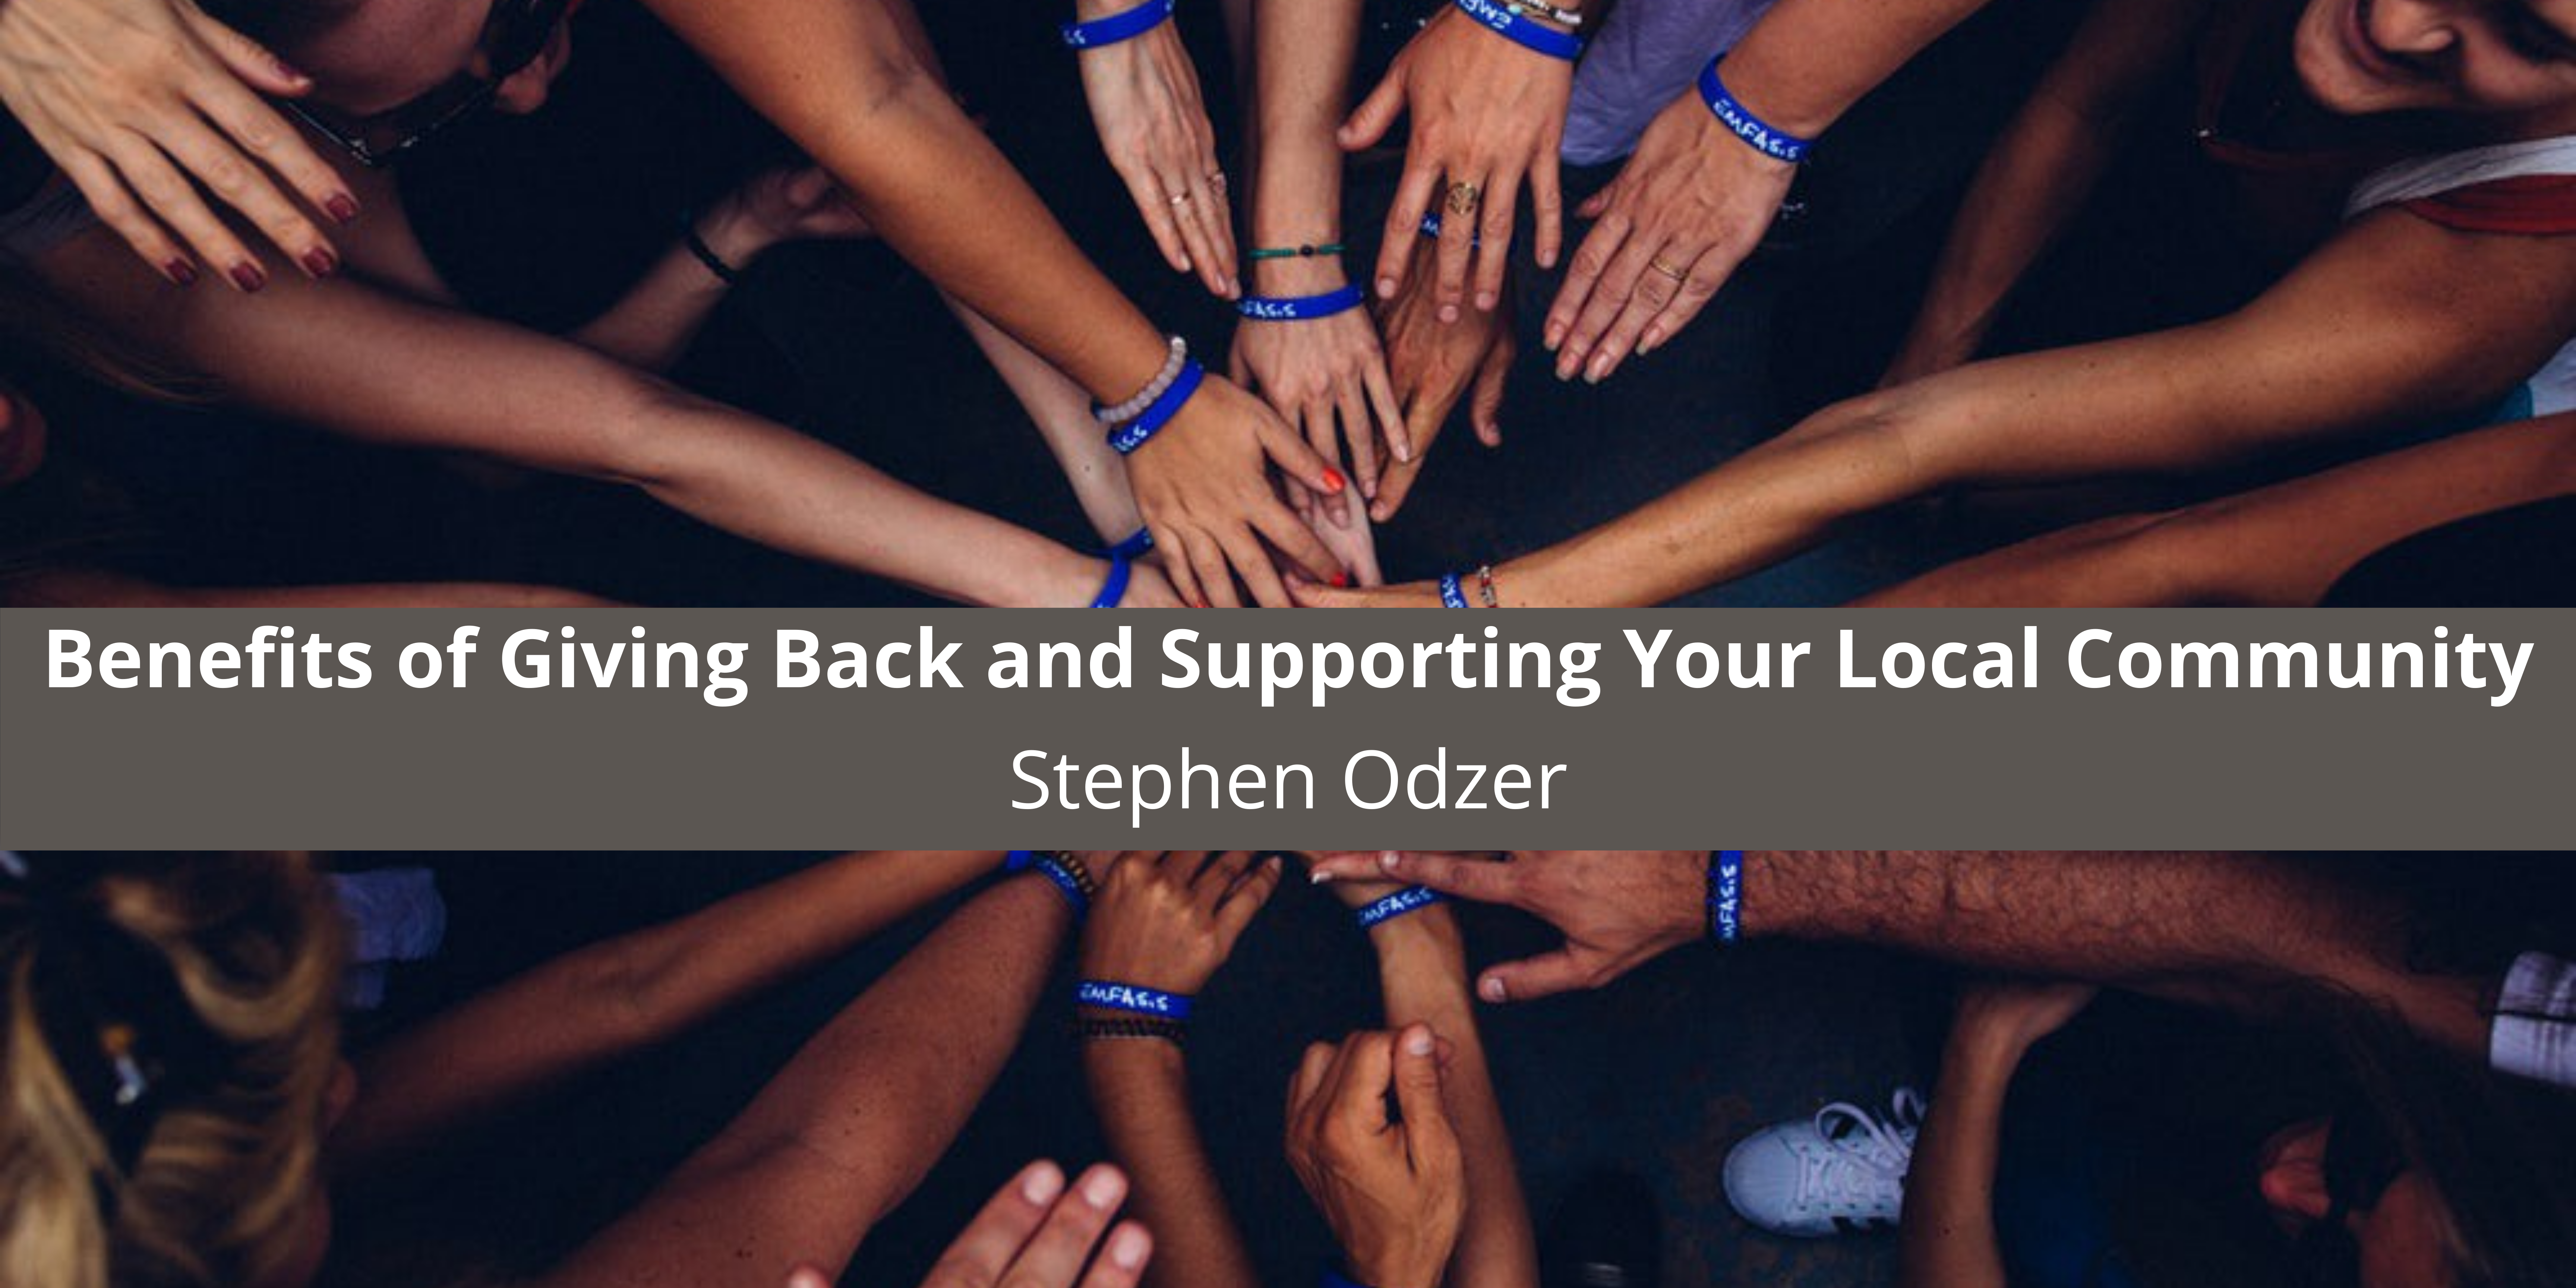 Philanthropist Stephen Odzer of Woodmere, NY Looks at the Benefits of Giving Back and Supporting Your Local Community